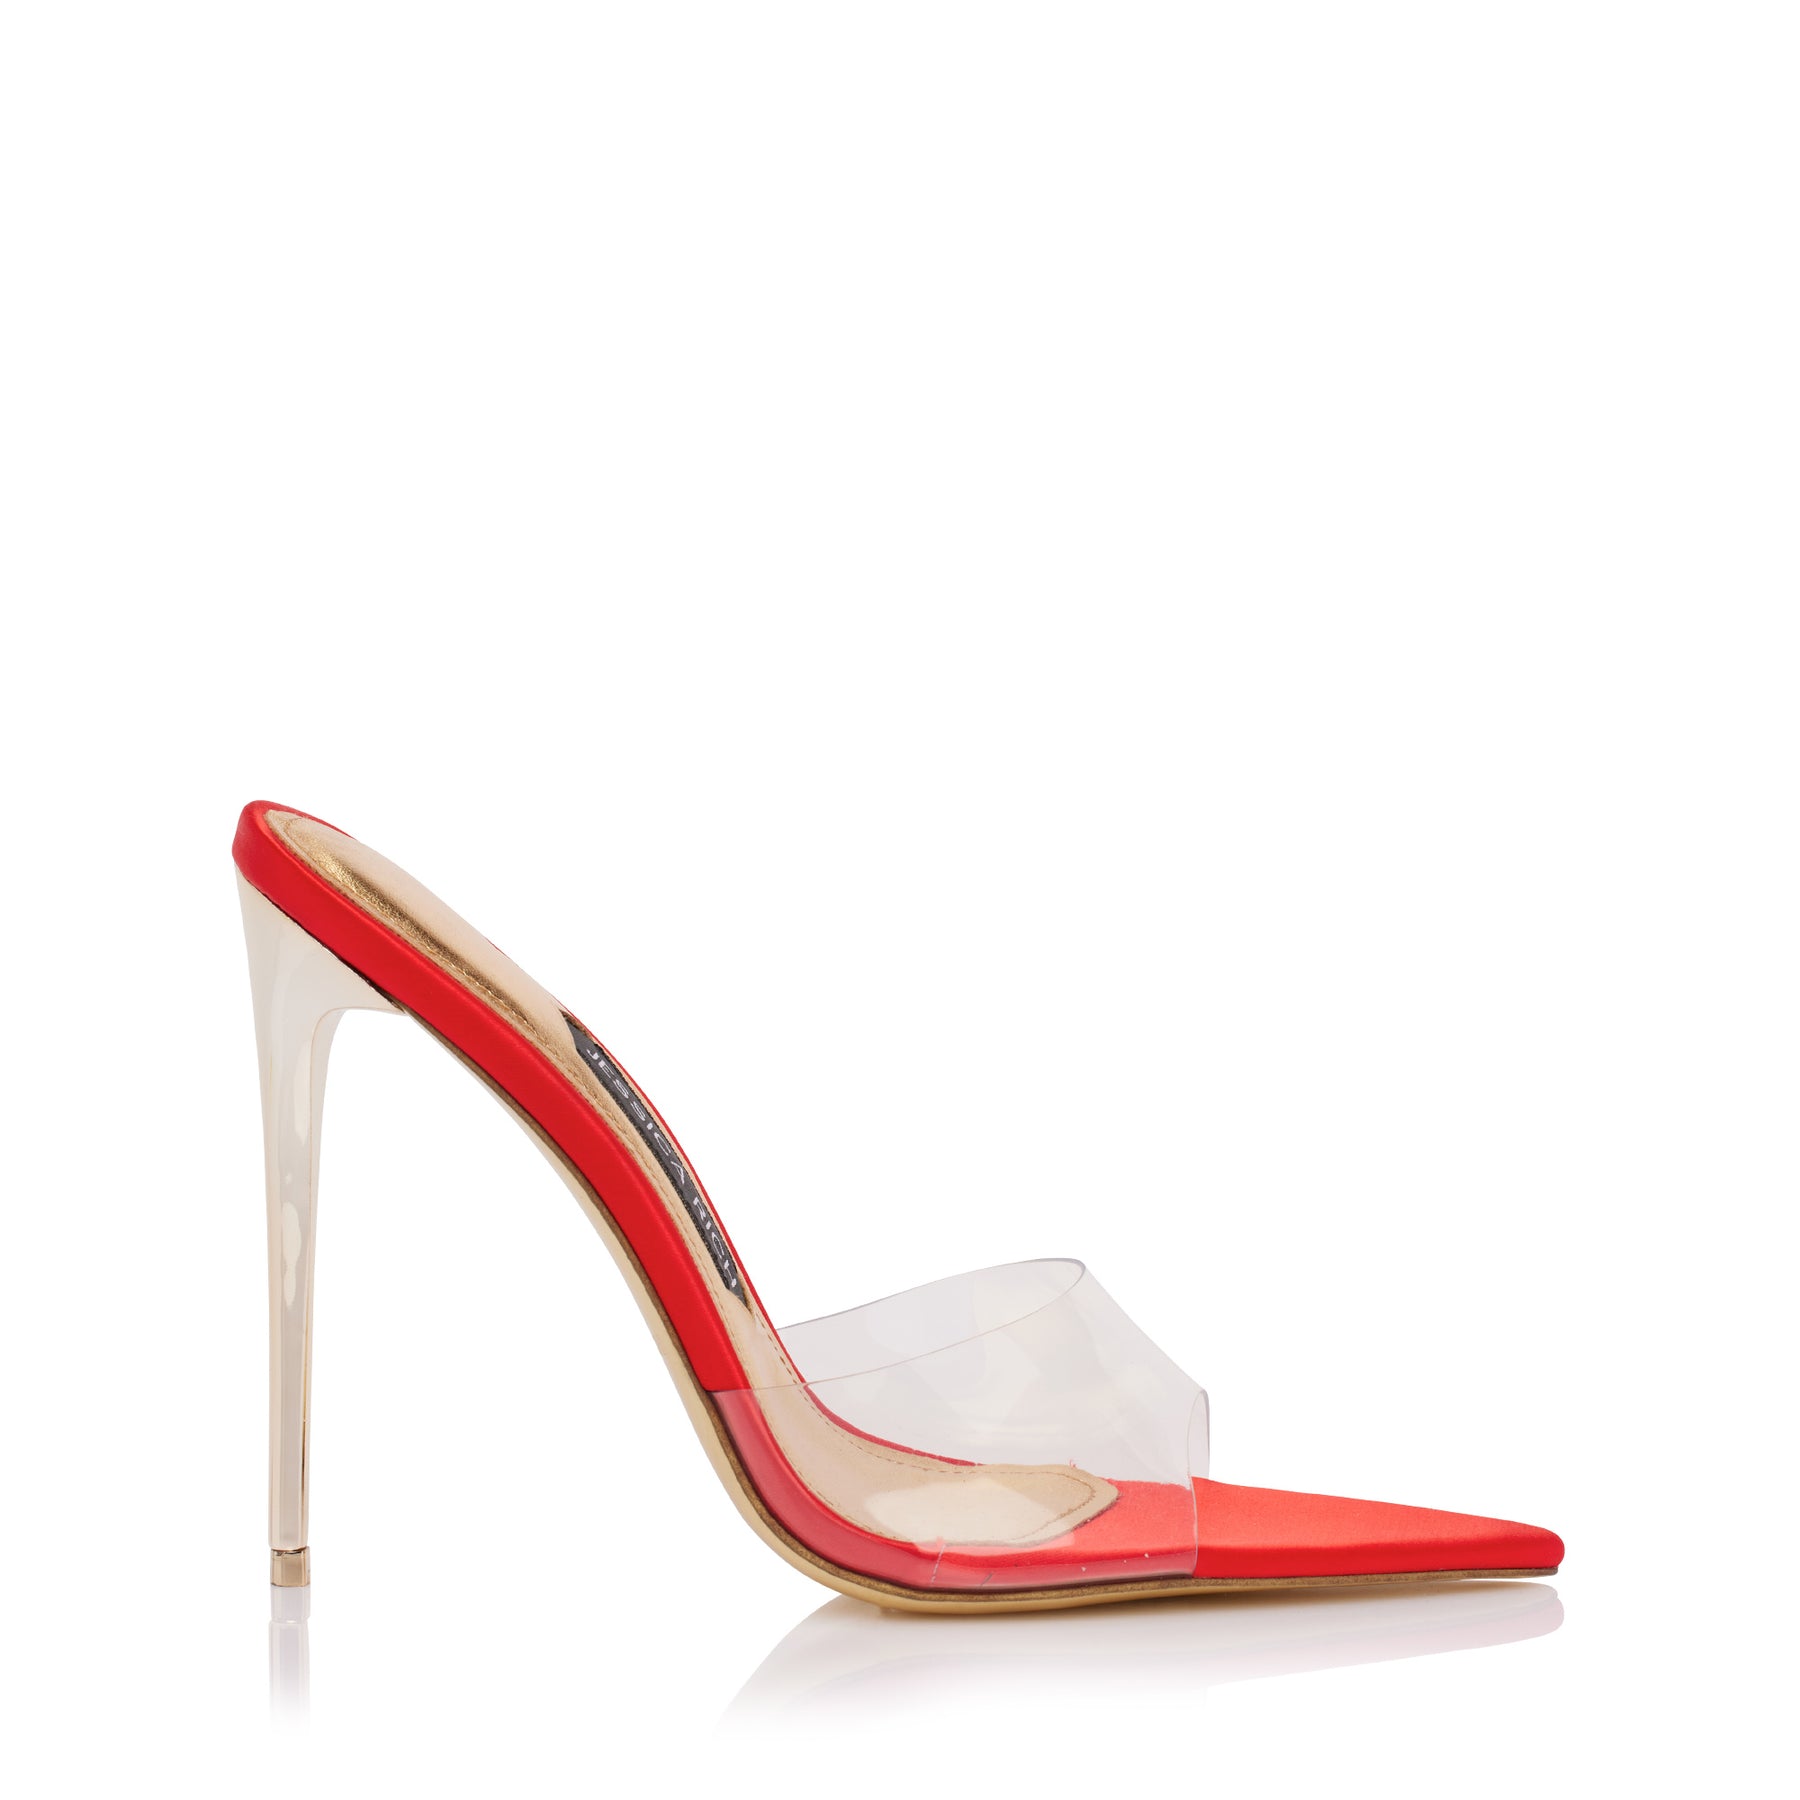 RACY MULE 120 MM | SATIN RED